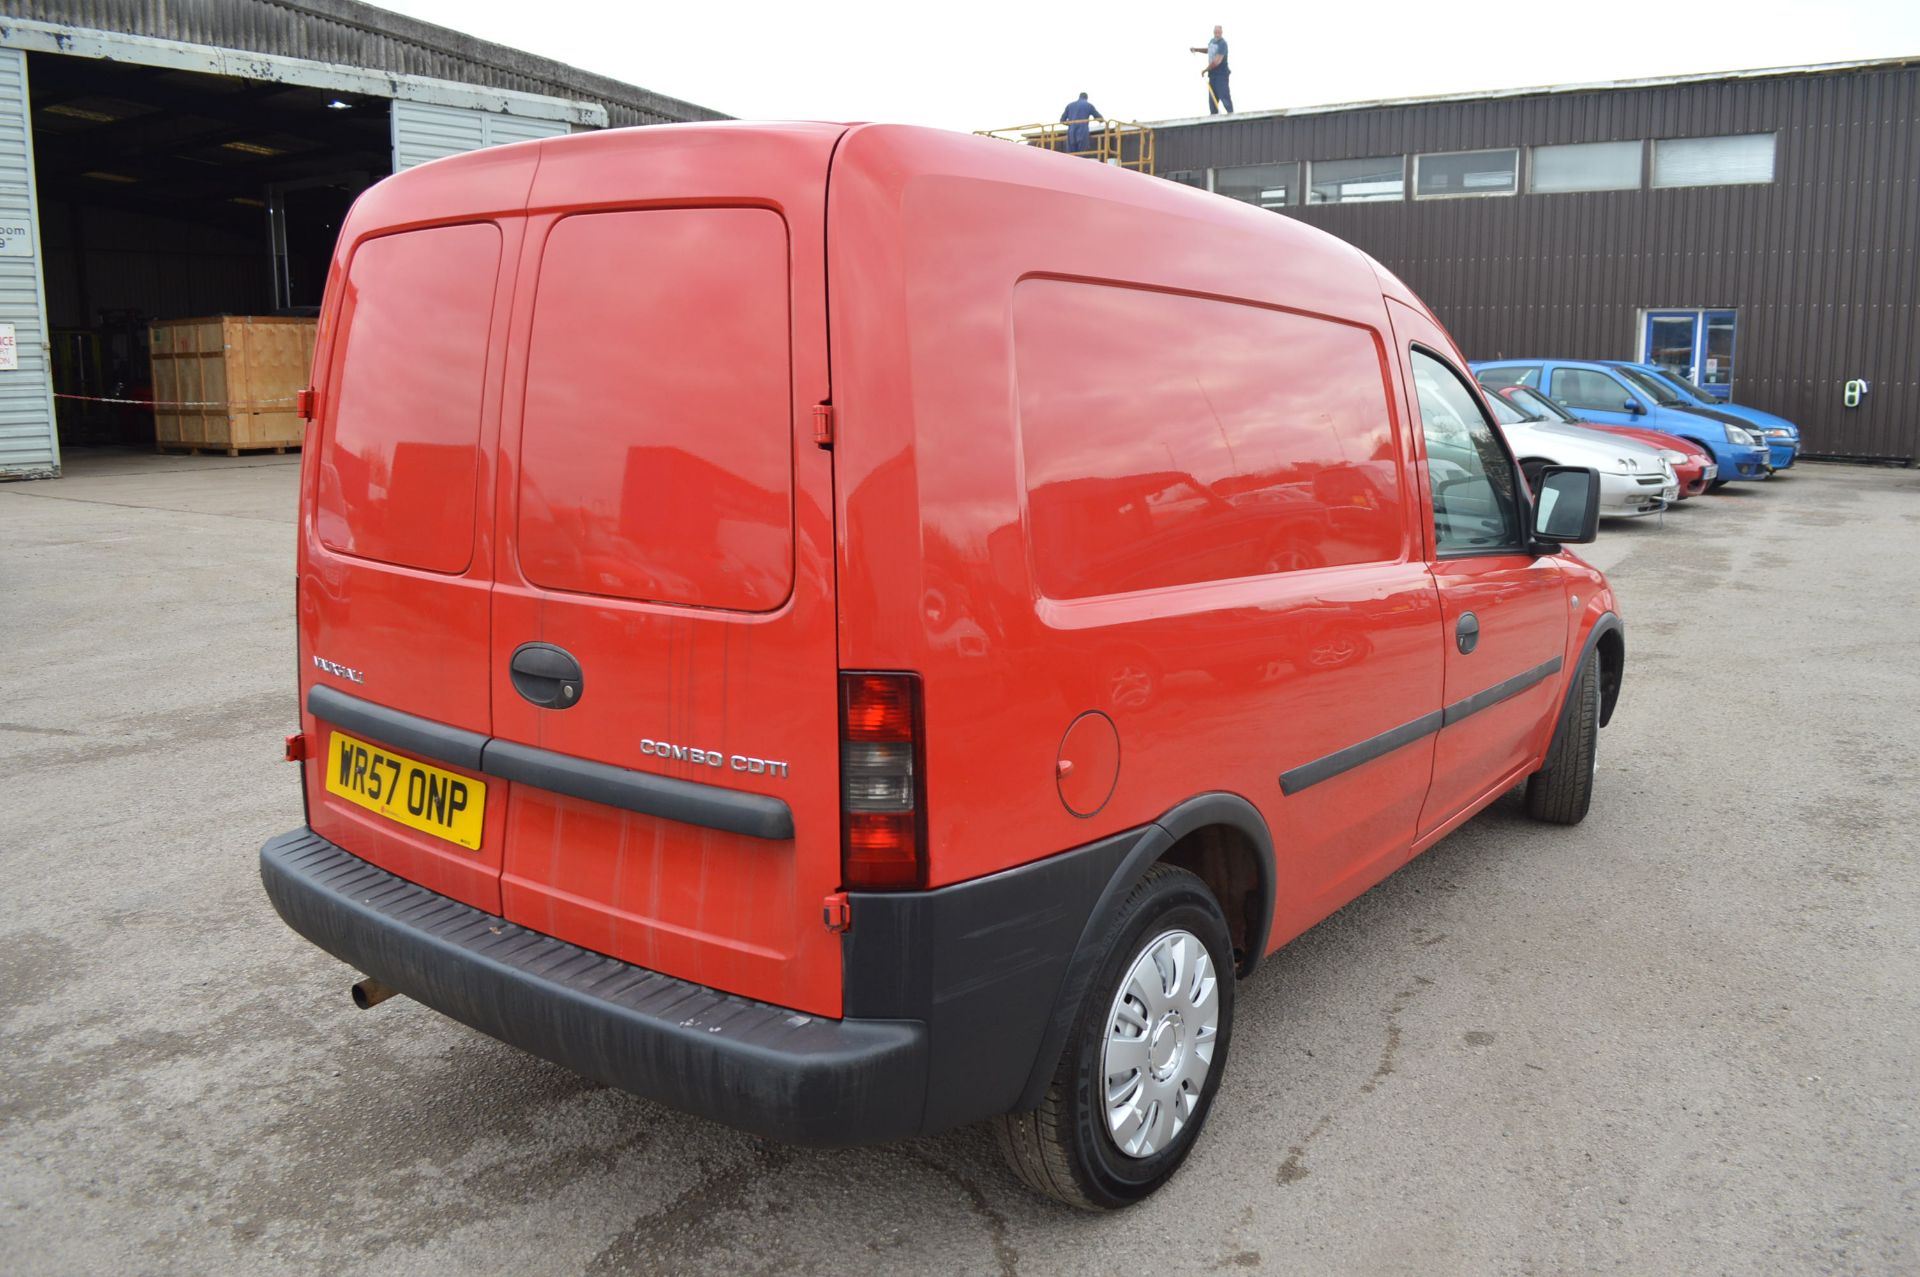 2008/57 REG VAUXHALL COMBO 1700 CDTI, SHOWING 1 OWNER FROM NEW *NO VAT* - Image 6 of 16